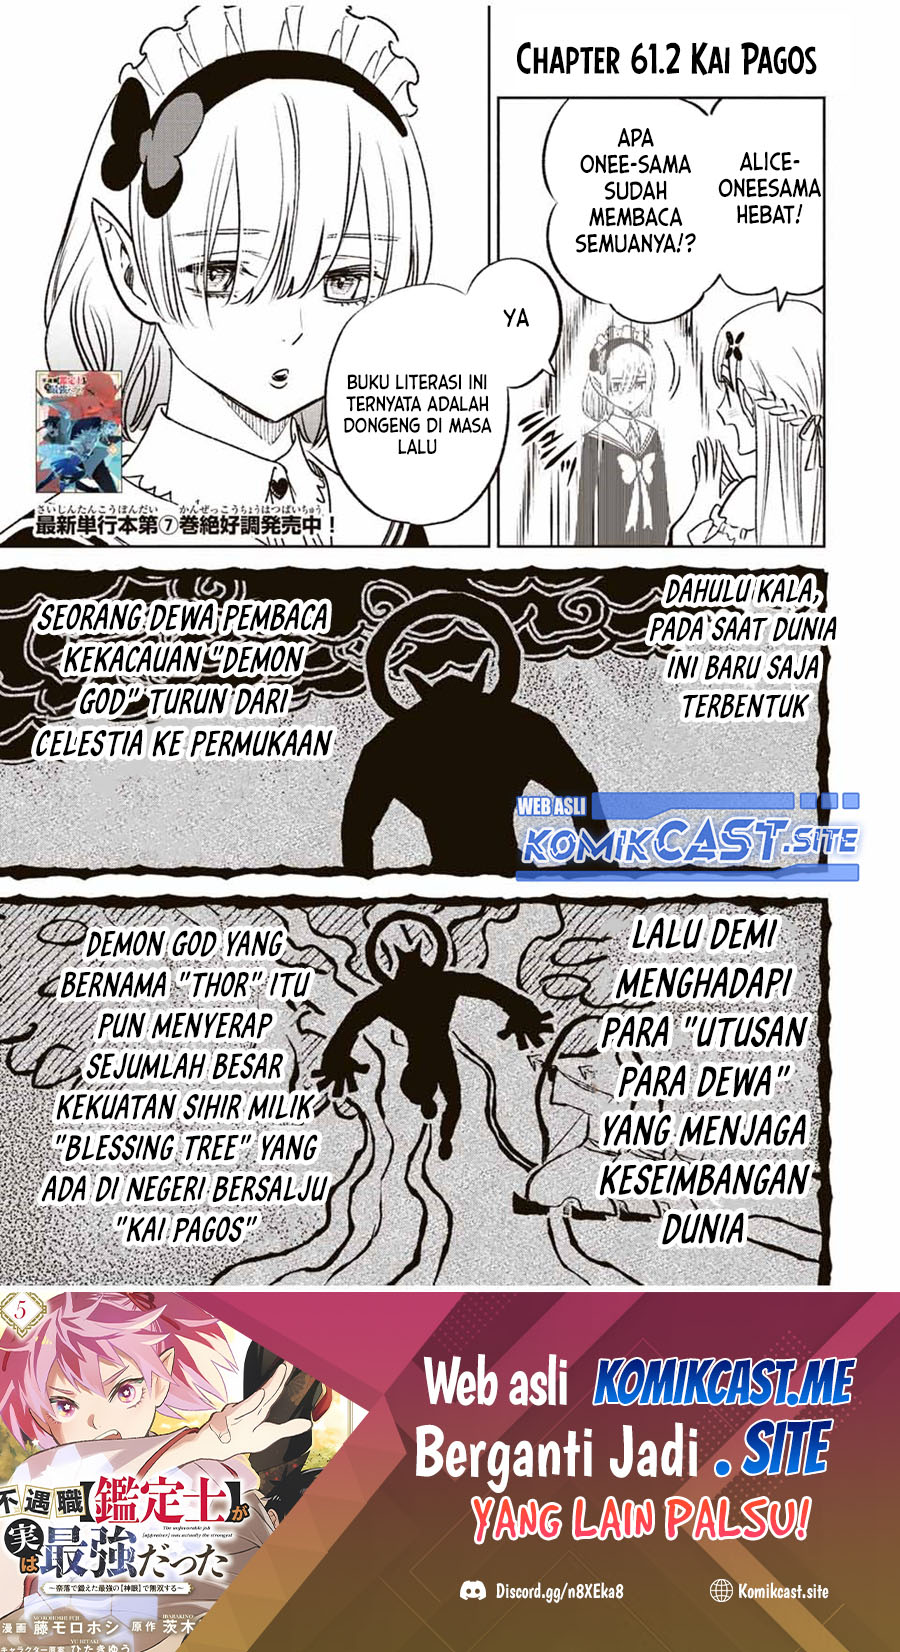 Baca Manga The Unfavorable Job “Appraiser” Is Actually the Strongest Chapter 61.2 Gambar 2